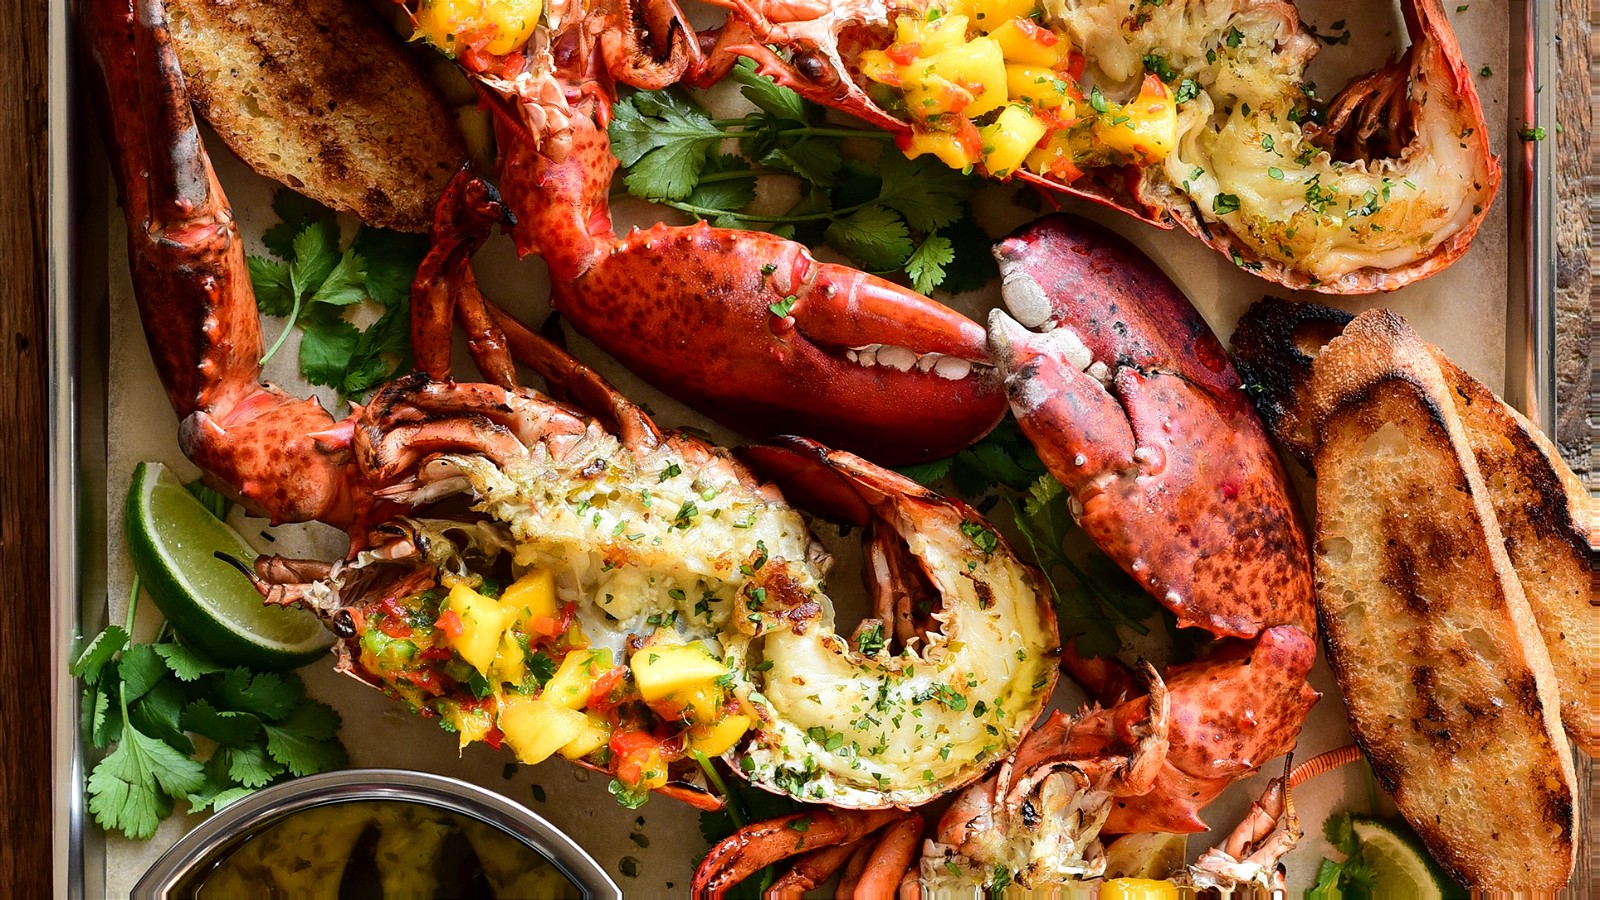 Image of Grilled Lobster with a Mango-Jalapeño Salsa